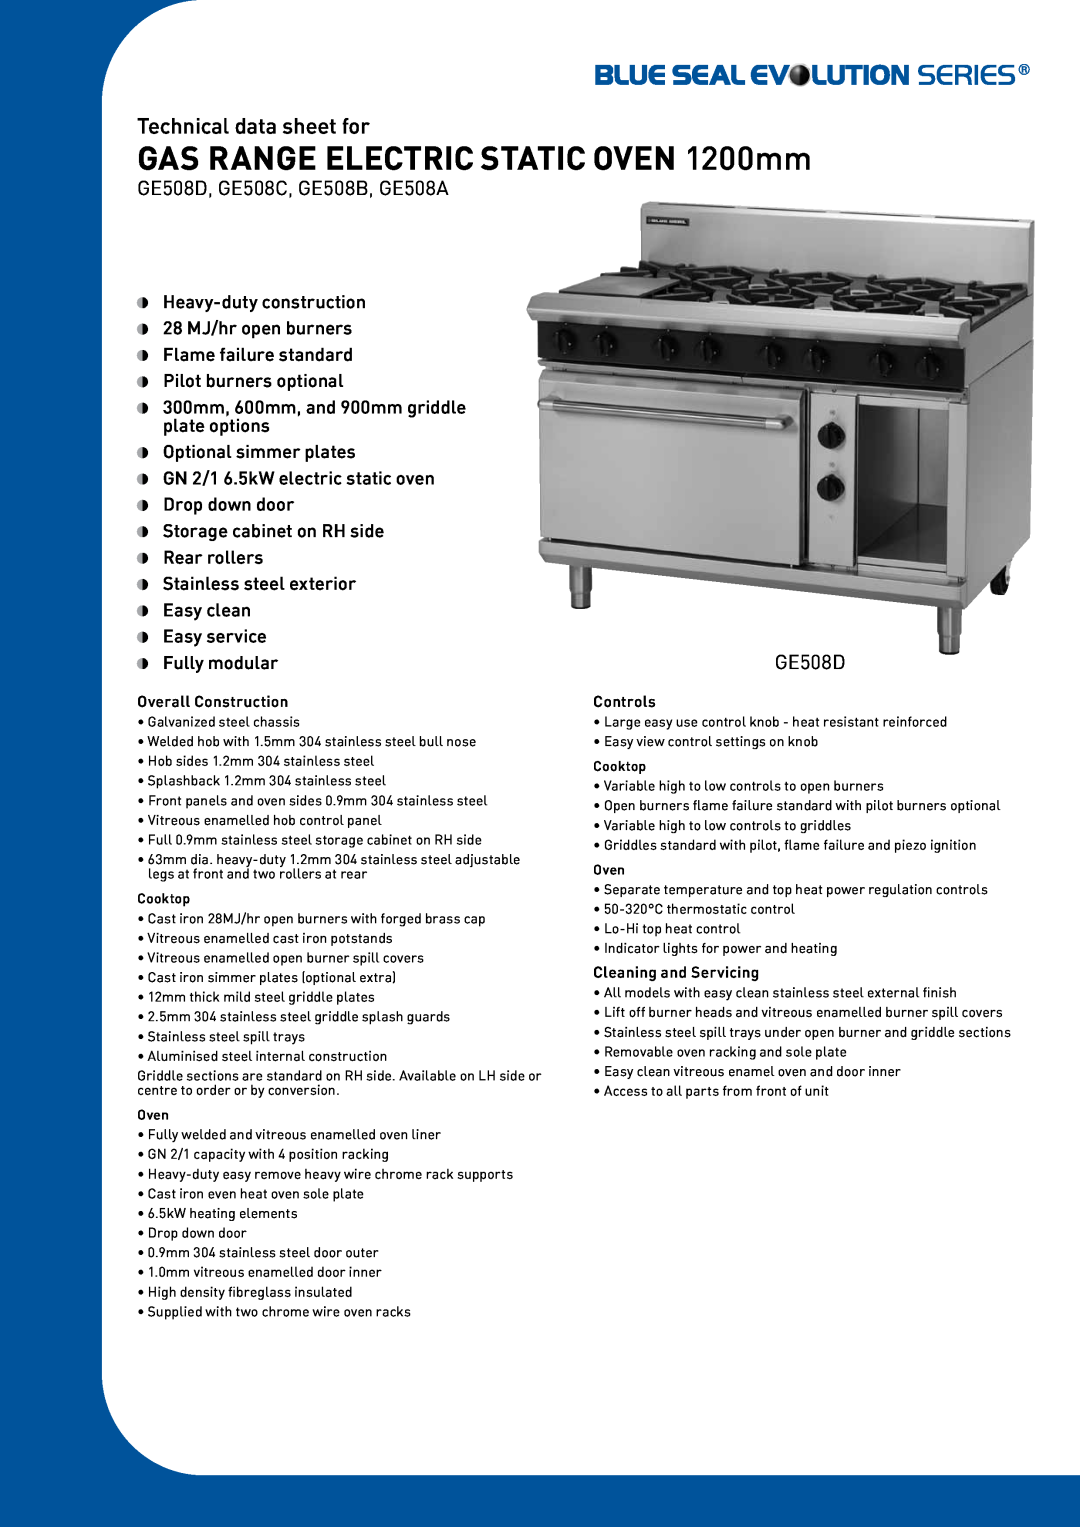 Moffat GE508D manual GAS RANGE ELECTRIC STATIC OVEN 1200mm, Technical data sheet for, Overall Construction, Controls 